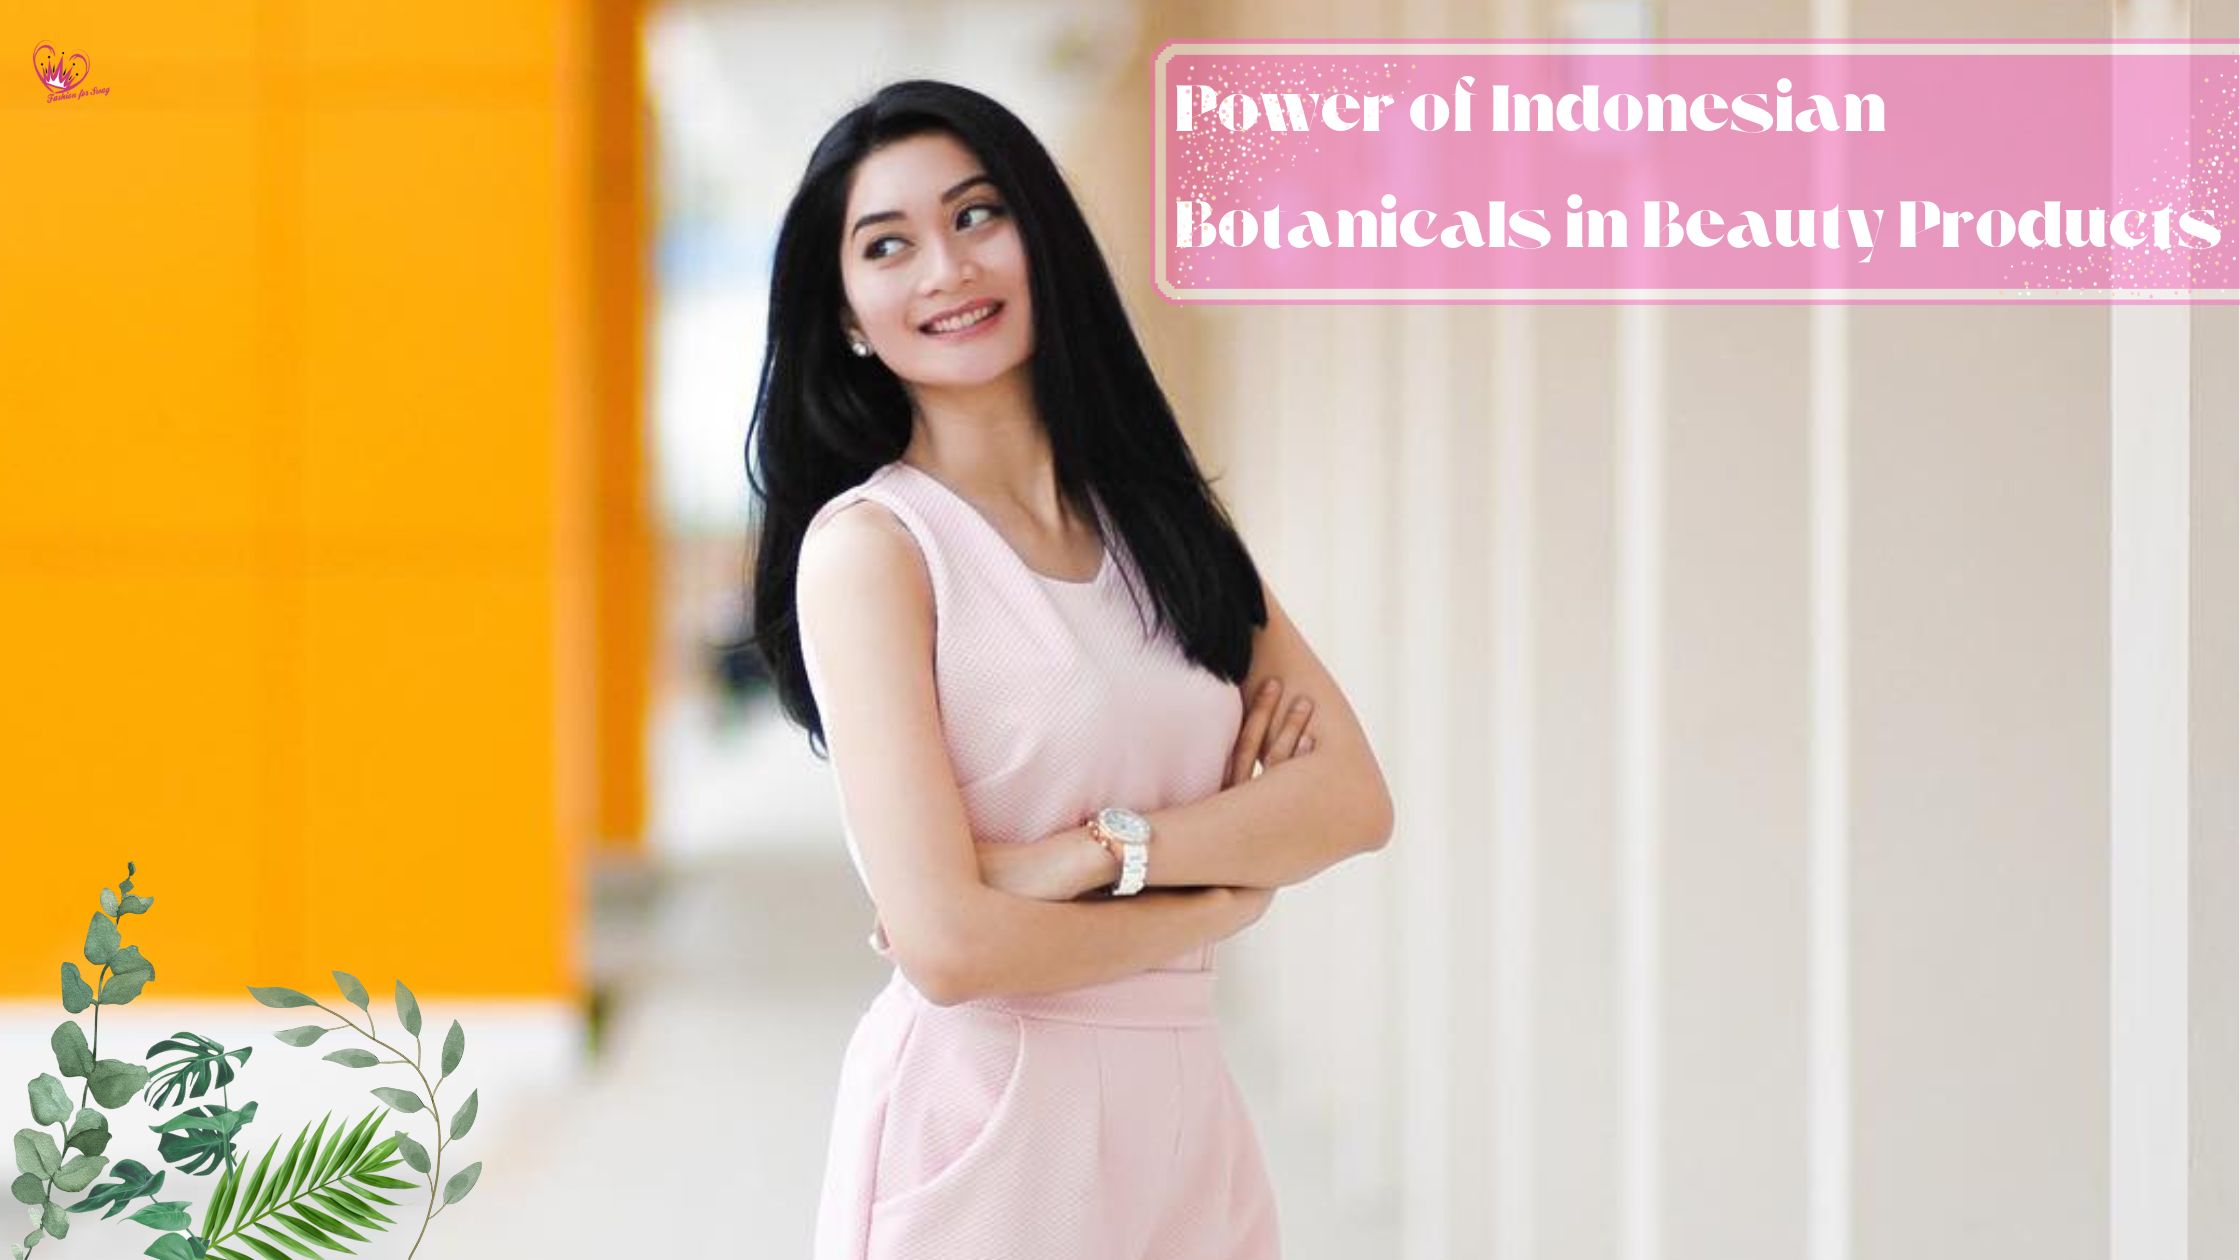 Exotic Ingredients: The Power of Indonesian Botanicals in Beauty Products